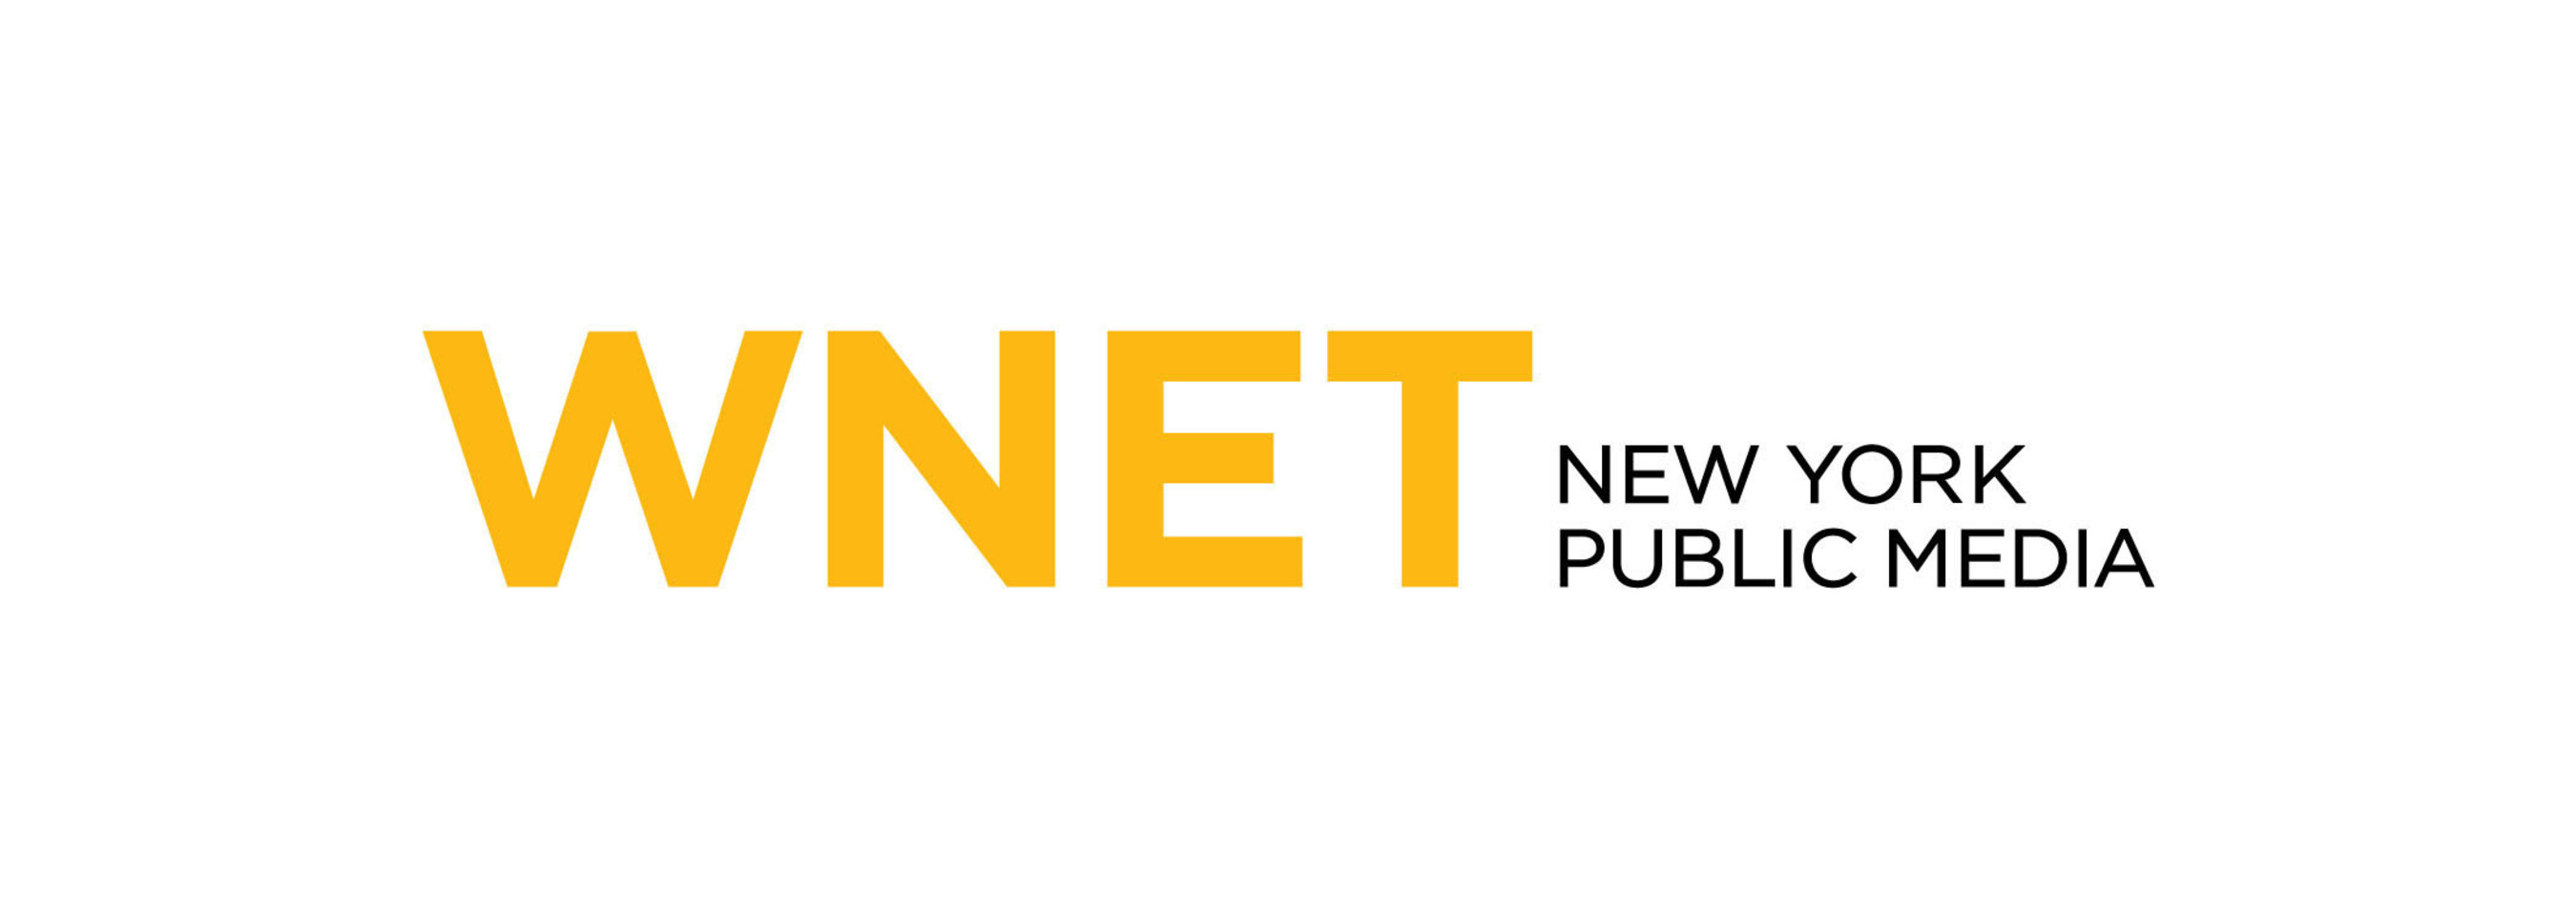 WNET is New York's flagship PBS station.